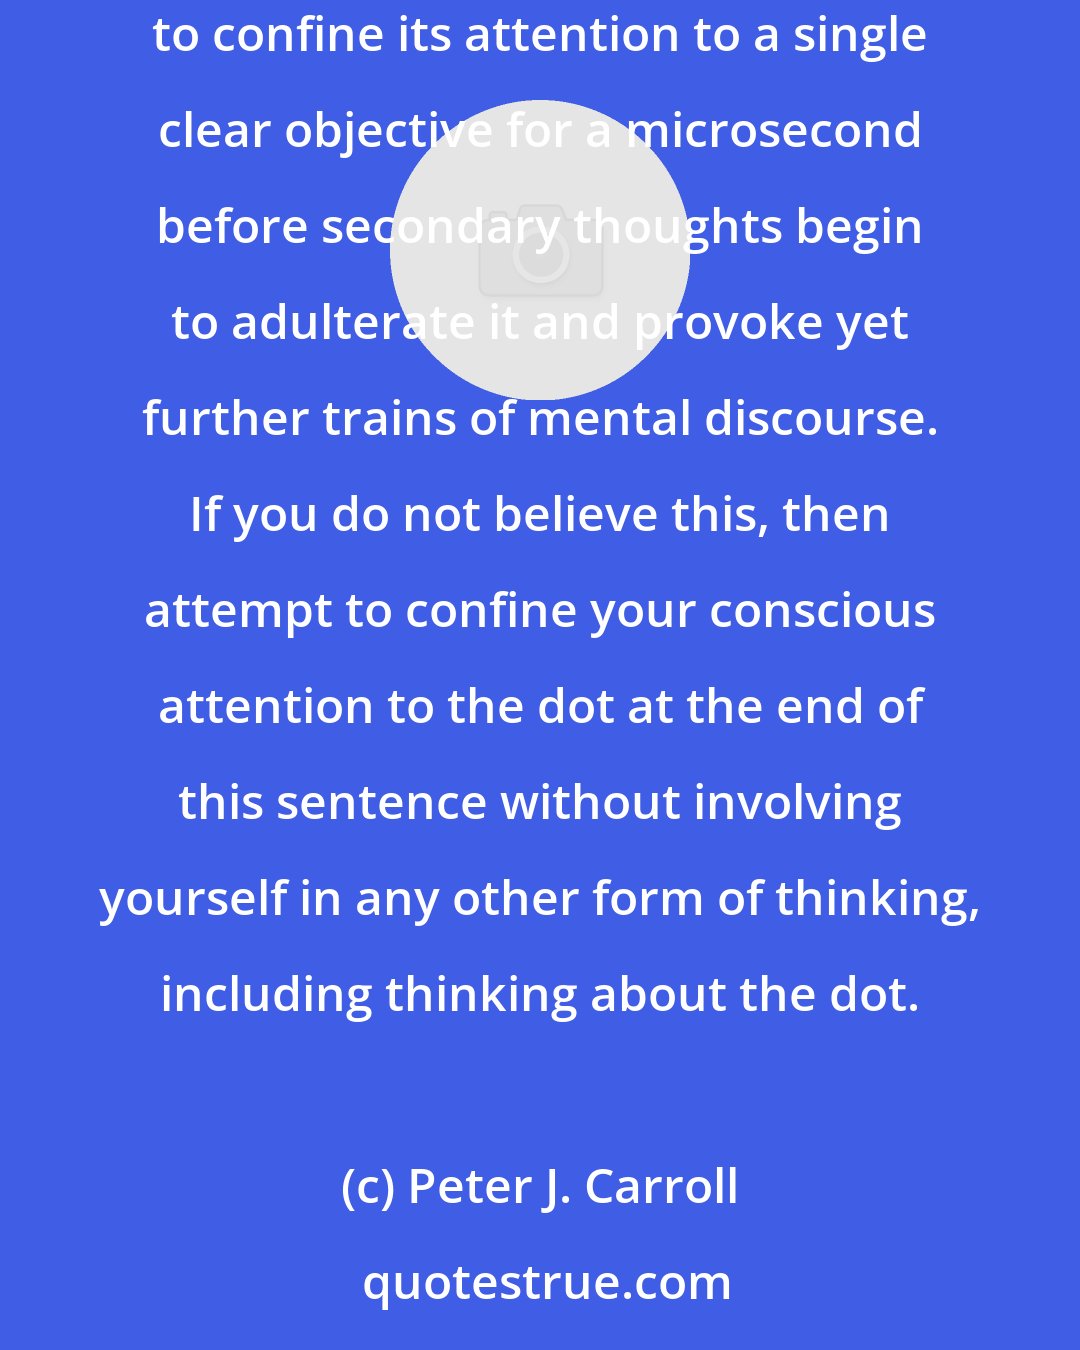 Peter J. Carroll: The conscious mind is a maelstrom of fleeting thoughts, images, sensations, feelings, conflicting desires, and doubts; barely able to confine its attention to a single clear objective for a microsecond before secondary thoughts begin to adulterate it and provoke yet further trains of mental discourse. If you do not believe this, then attempt to confine your conscious attention to the dot at the end of this sentence without involving yourself in any other form of thinking, including thinking about the dot.